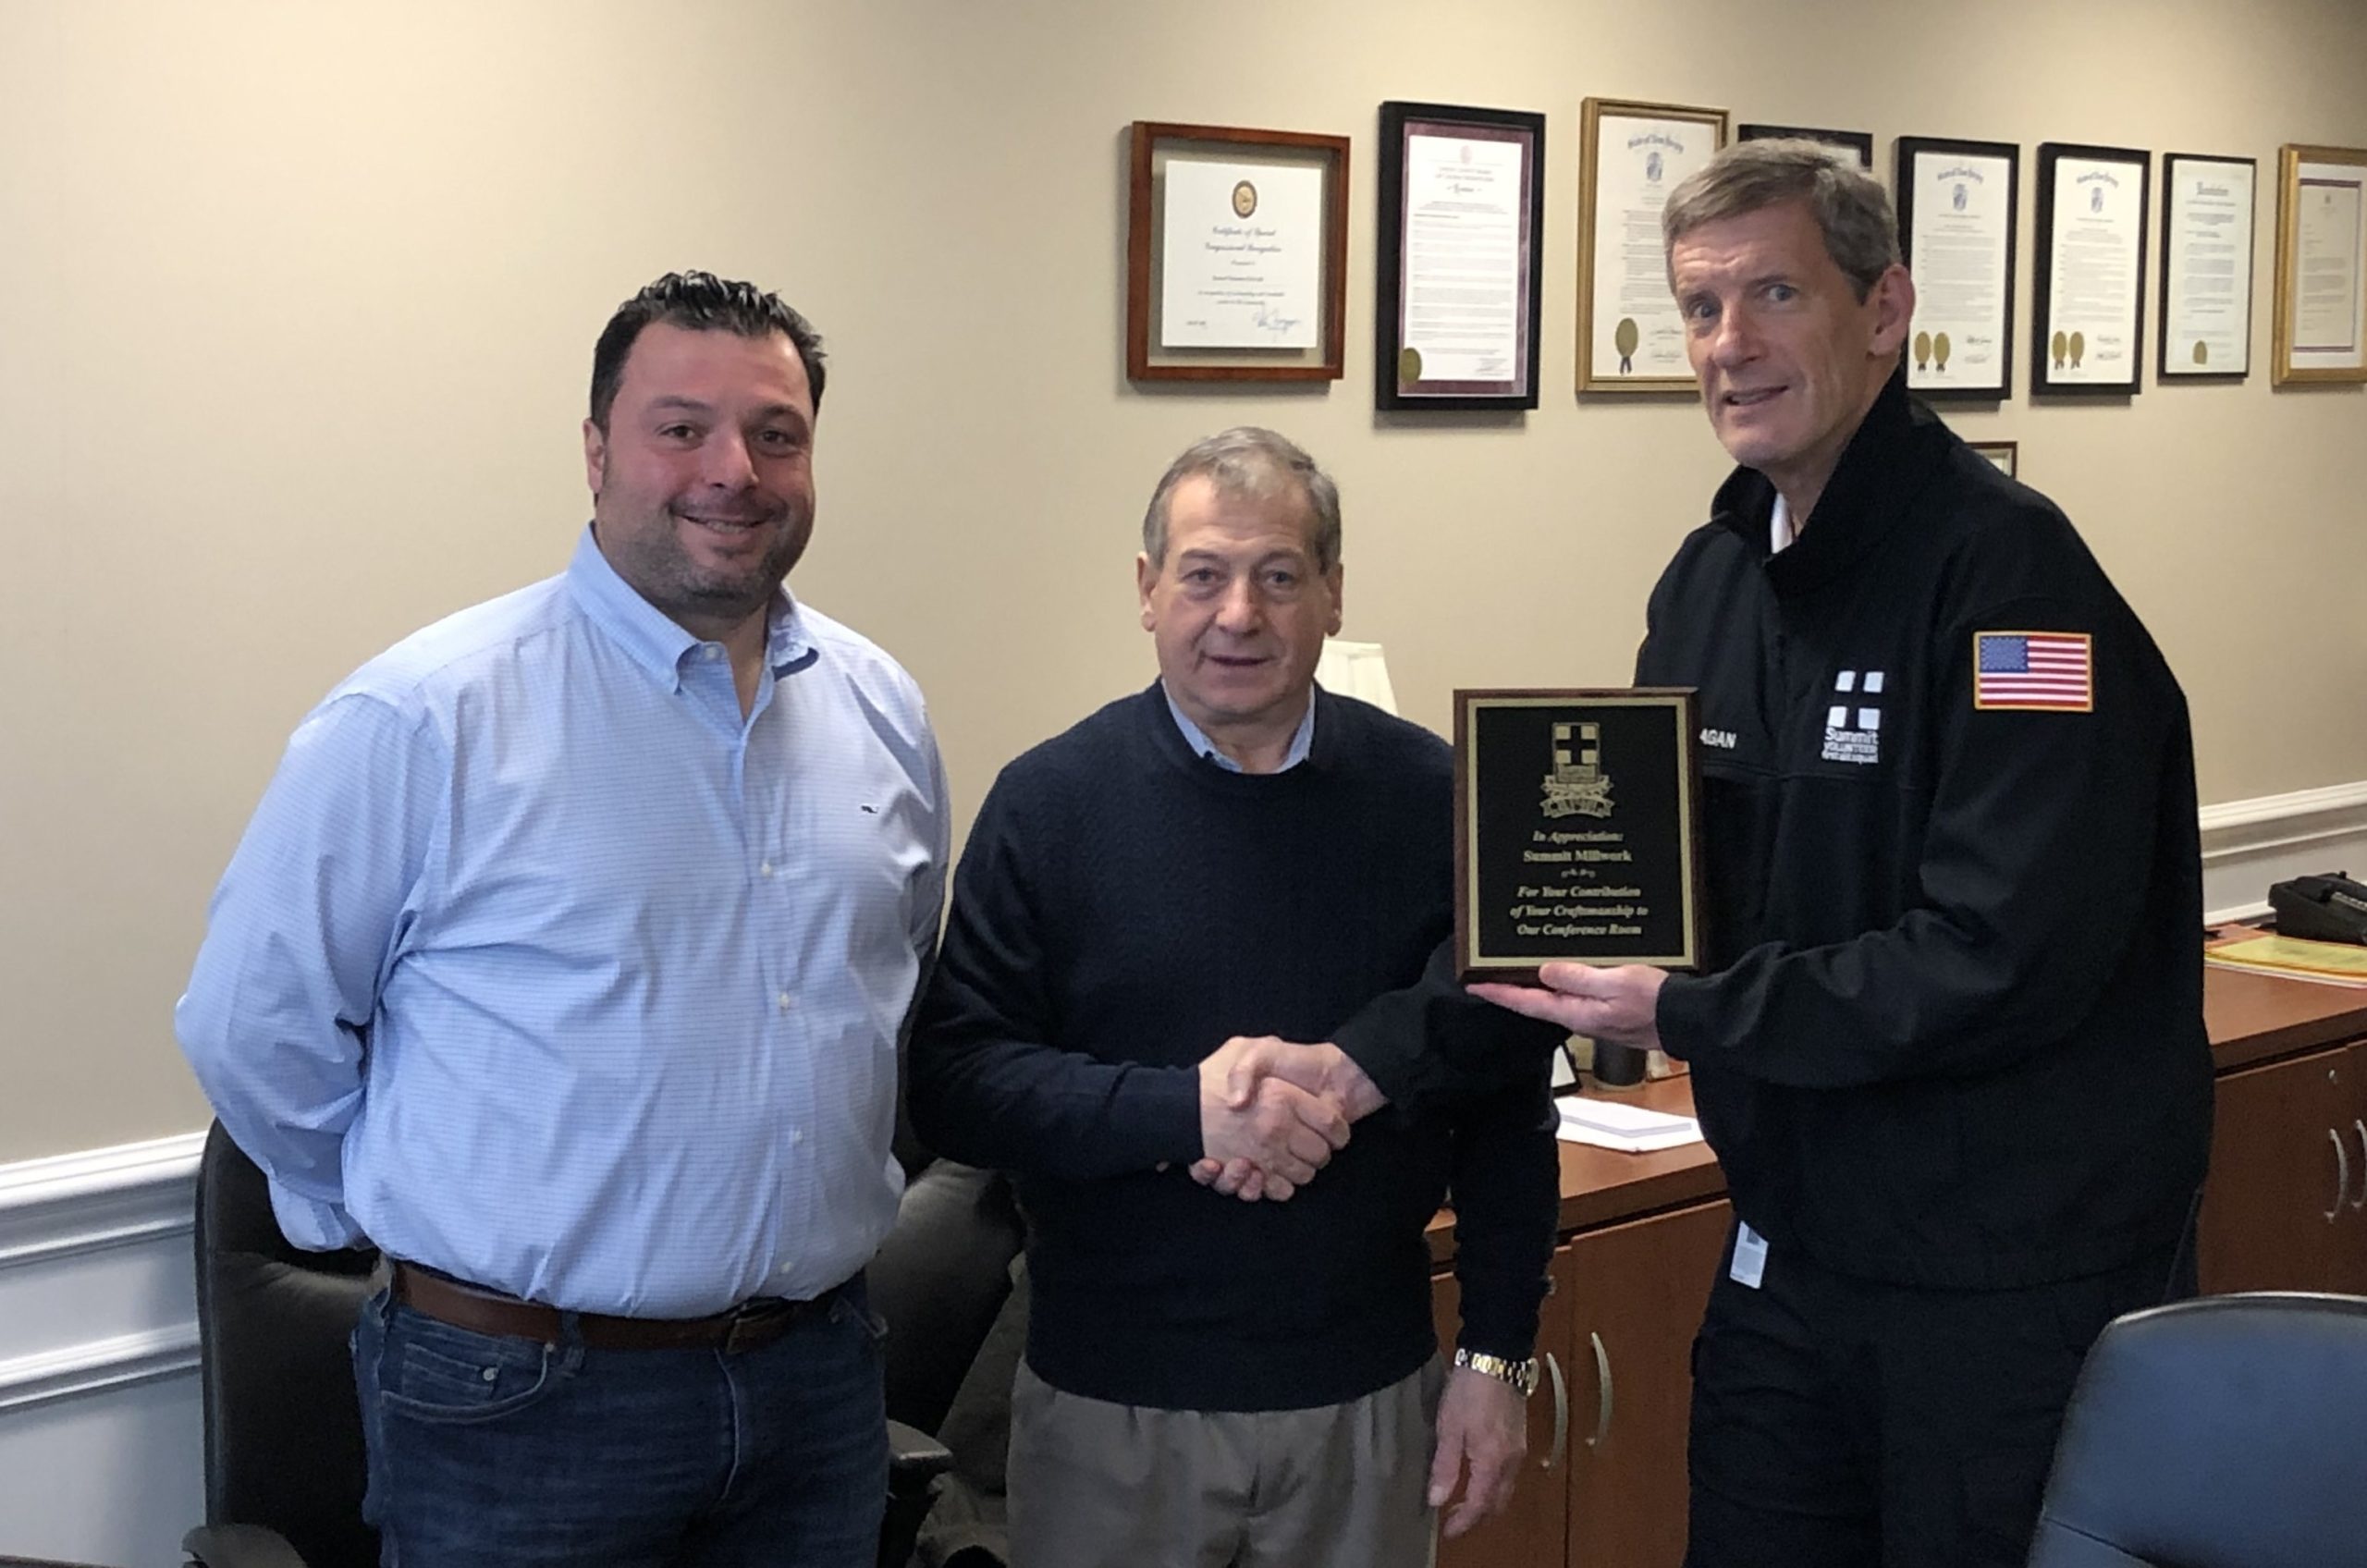 Nick Curiale and Aldo Curiale of Summit Millwork accept a plaque from First Aid Squad President Bob Flanagan (John Staunton photo).